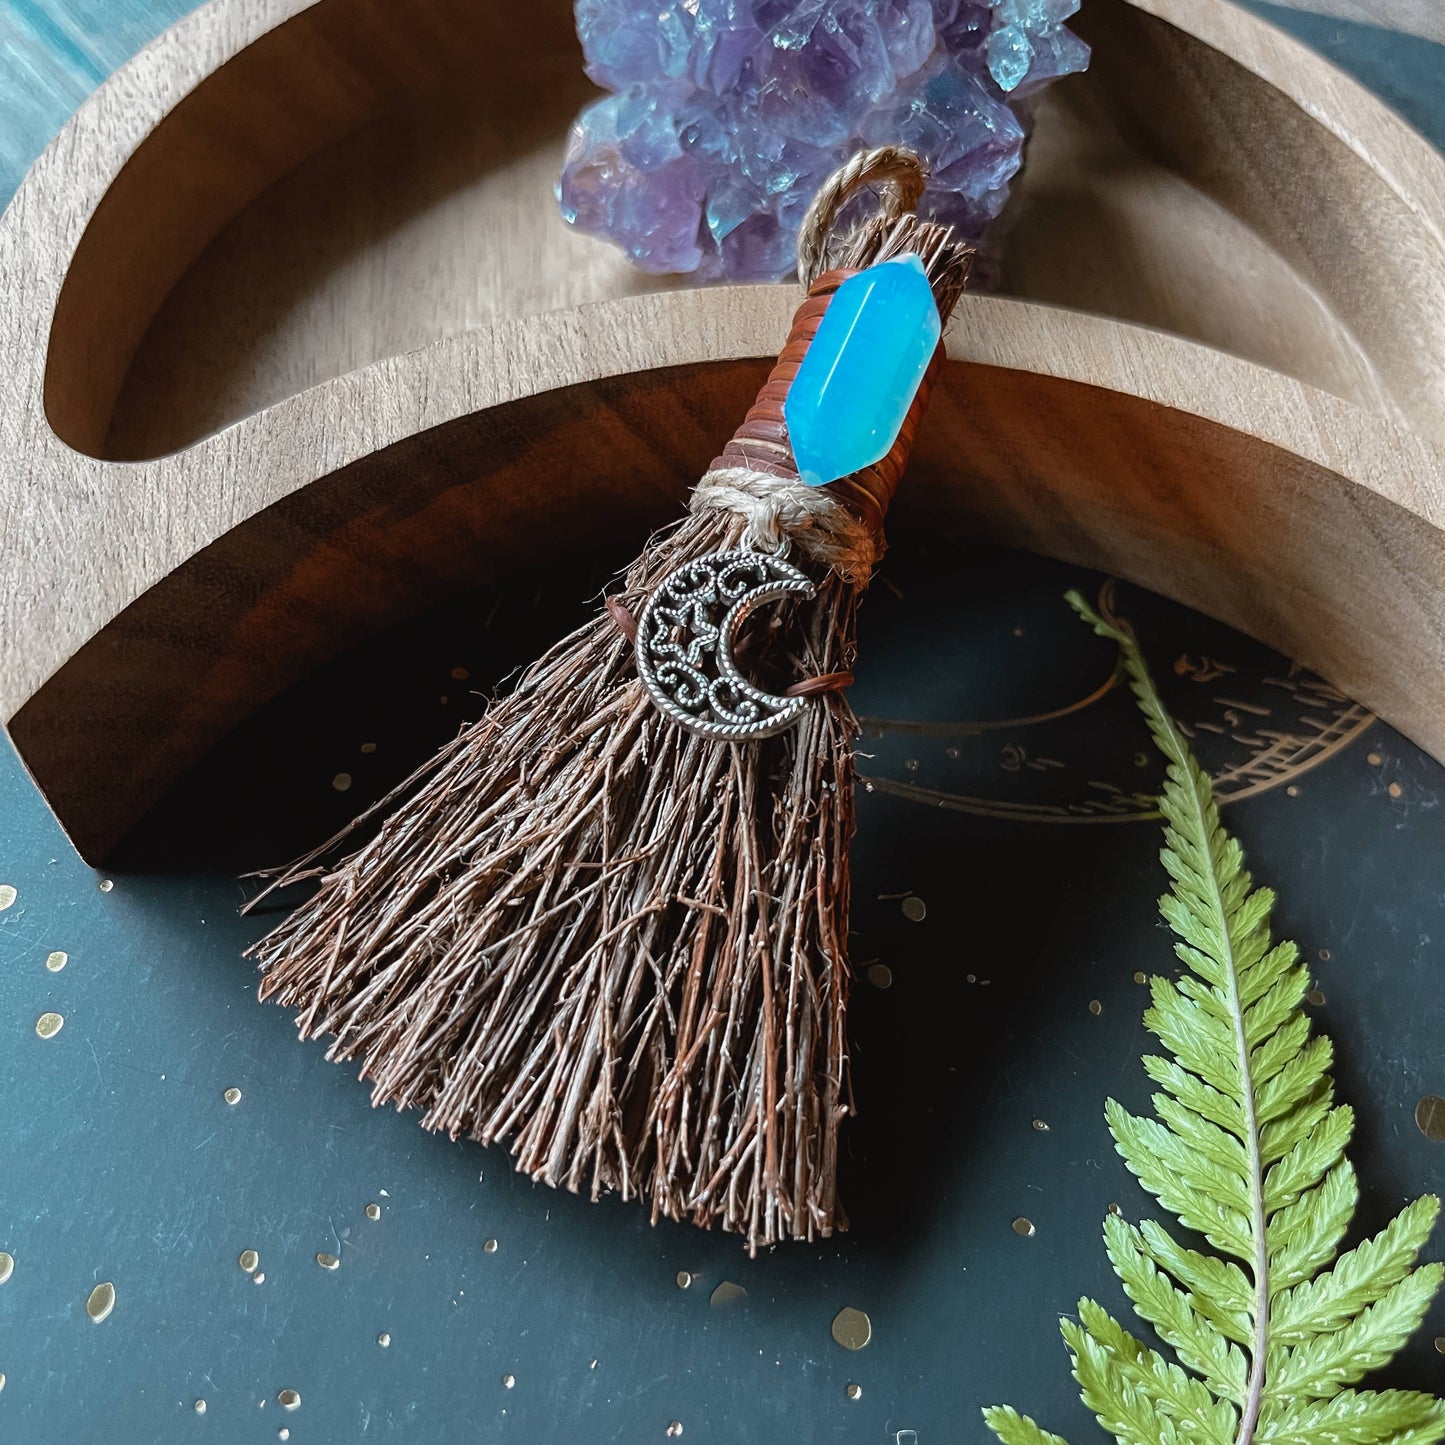 Opalite Moon Mini Witch's Besom, Witchy Altar Broom 3": Unscented